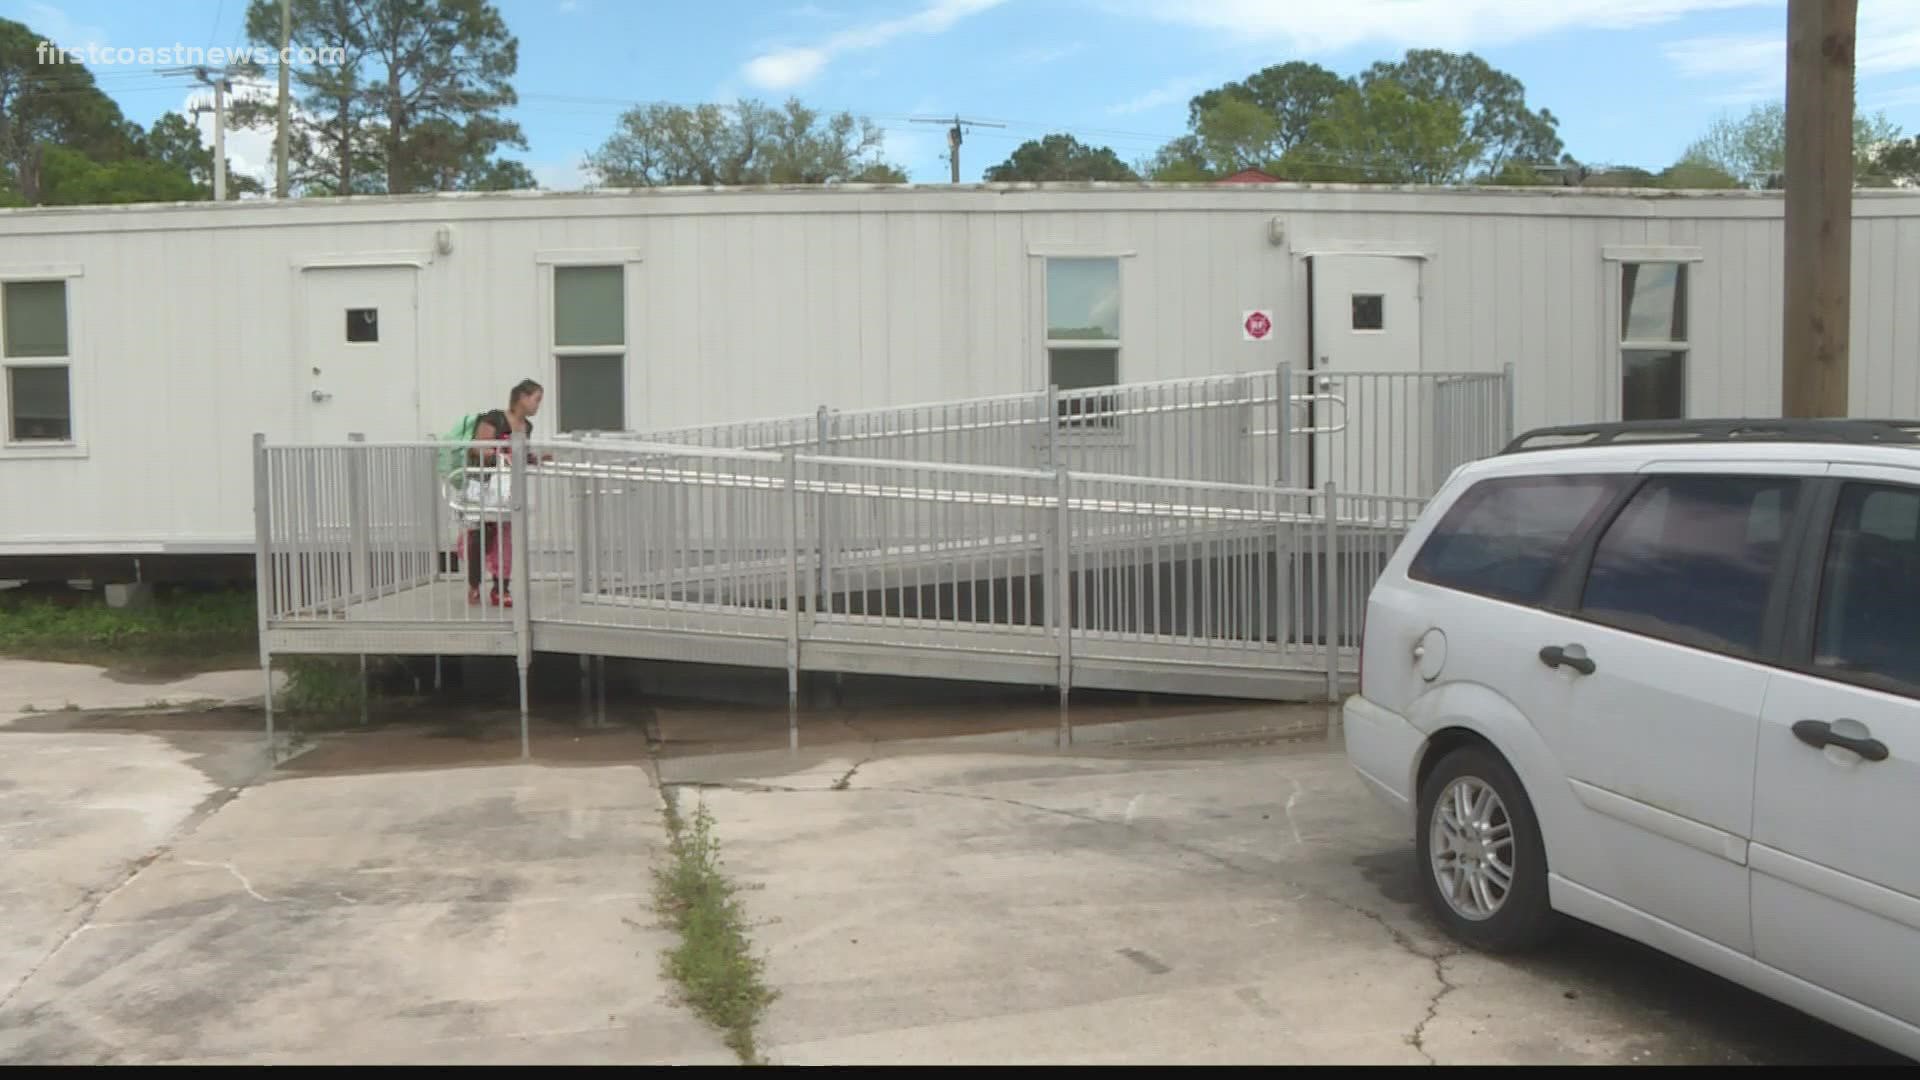 One of the Florida's richest counties has a homeless center that barely has the bare minimum